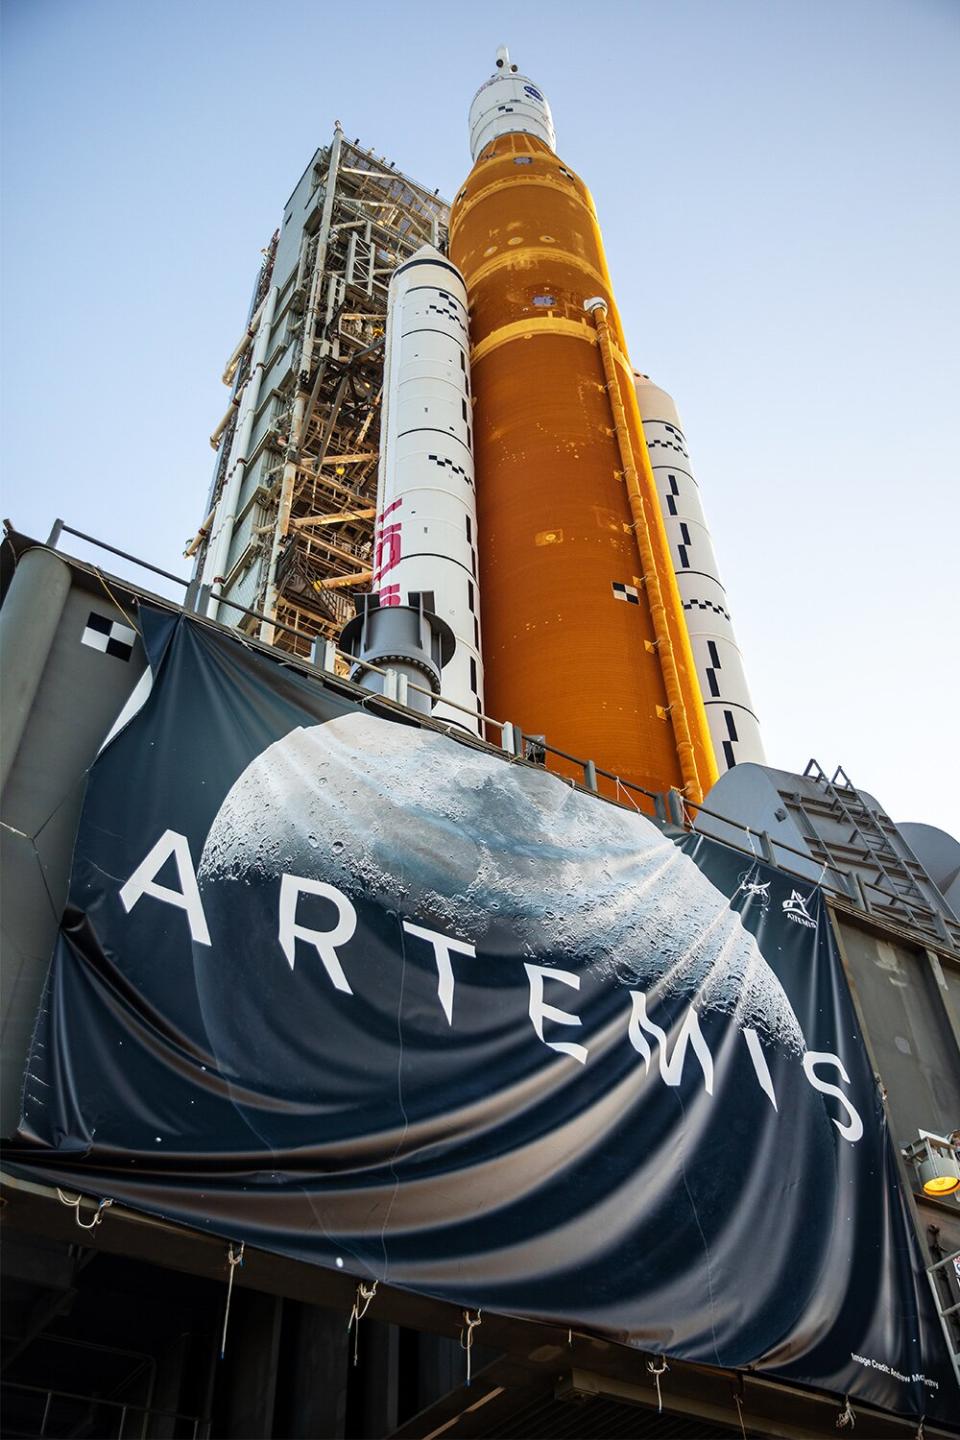 In this view looking up, NASA’s crawler-transporter 2 – adorned with an Artemis banner – can be seen bearing the weight of the agency’s Artemis I Moon rocket and mobile launcher as it carries the duo to Kennedy Space Center’s Launch Complex 39B in Florida on June 6, 2022. The rocket rolled out of the Vehicle Assembly Building in the early morning hours to travel the 4.2 miles to the launch pad for NASA’s next wet dress rehearsal attempt ahead of the Artemis I launch. The first in an increasingly complex series of missions, Artemis I will test the Space Launch System rocket and Orion spacecraft as an integrated system prior to crewed flights to the Moon. Through Artemis, NASA will land the first woman and first person of color on the lunar surface, paving the way for a long-term lunar presence and using the Moon as a steppingstone before venturing to Mars.